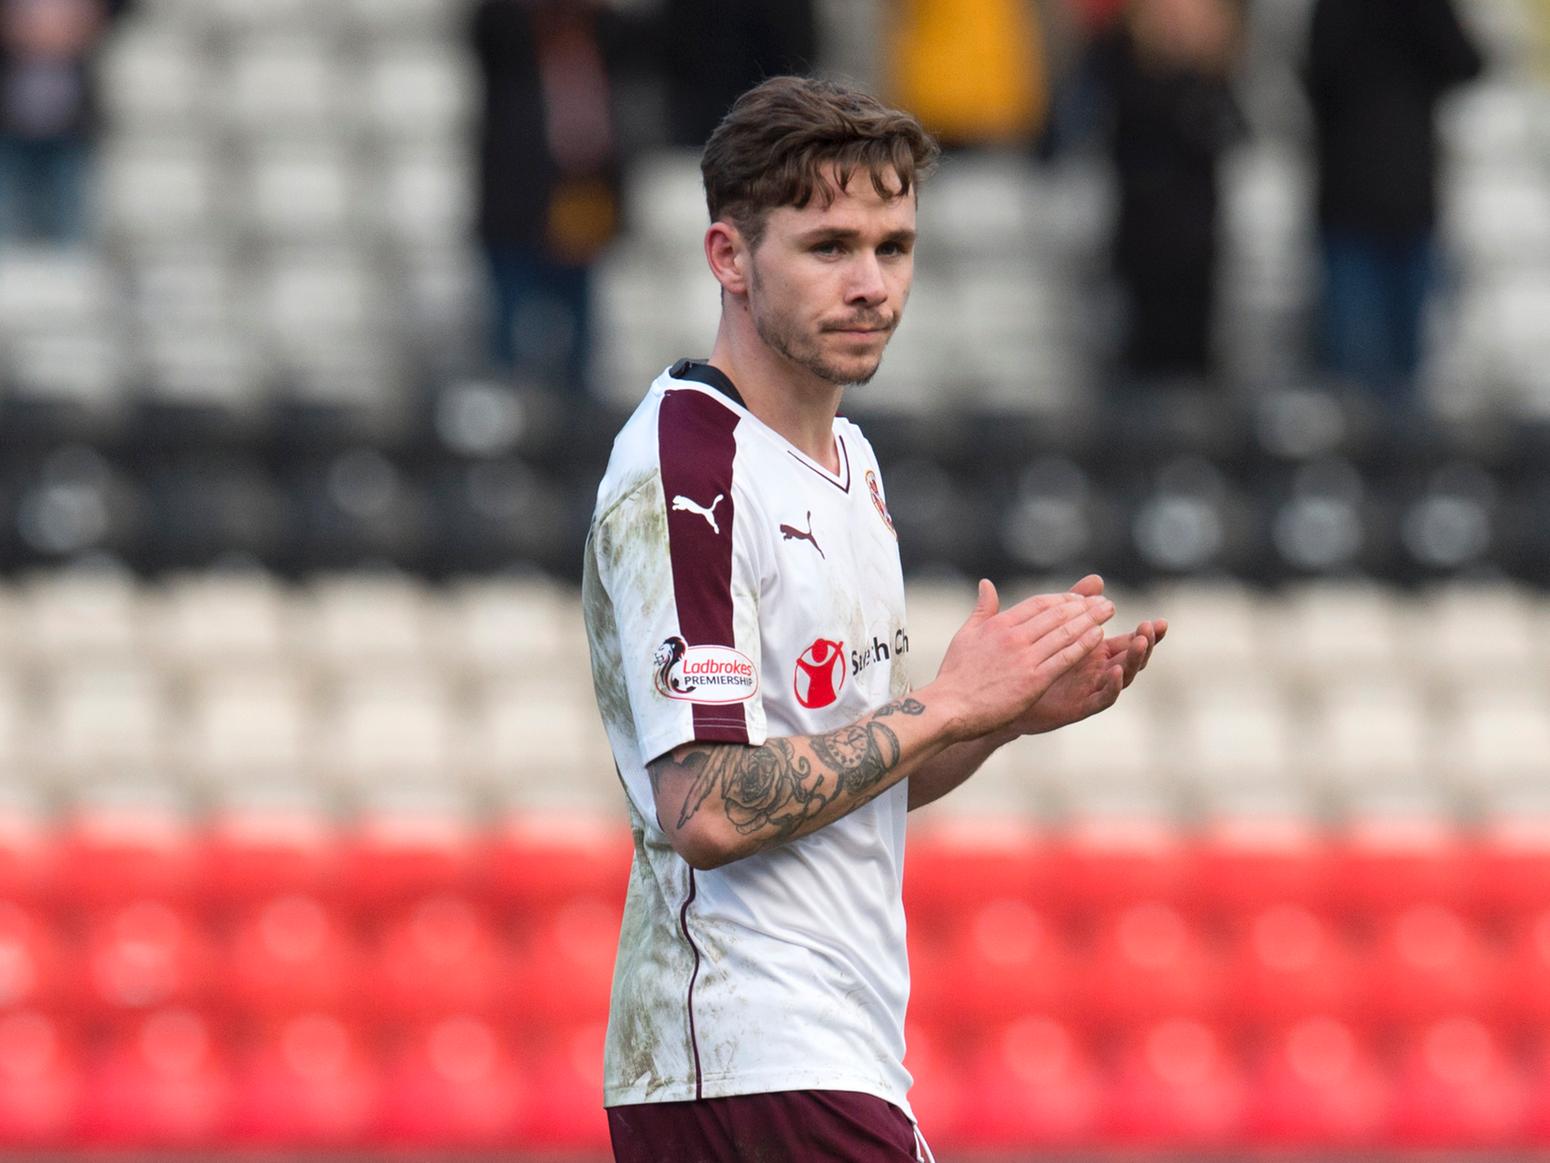 His playing regularly for Colorado Rapids in the MLS puts him ahead of David Templeton, who is struggling to get a game at League One Burton Albion.